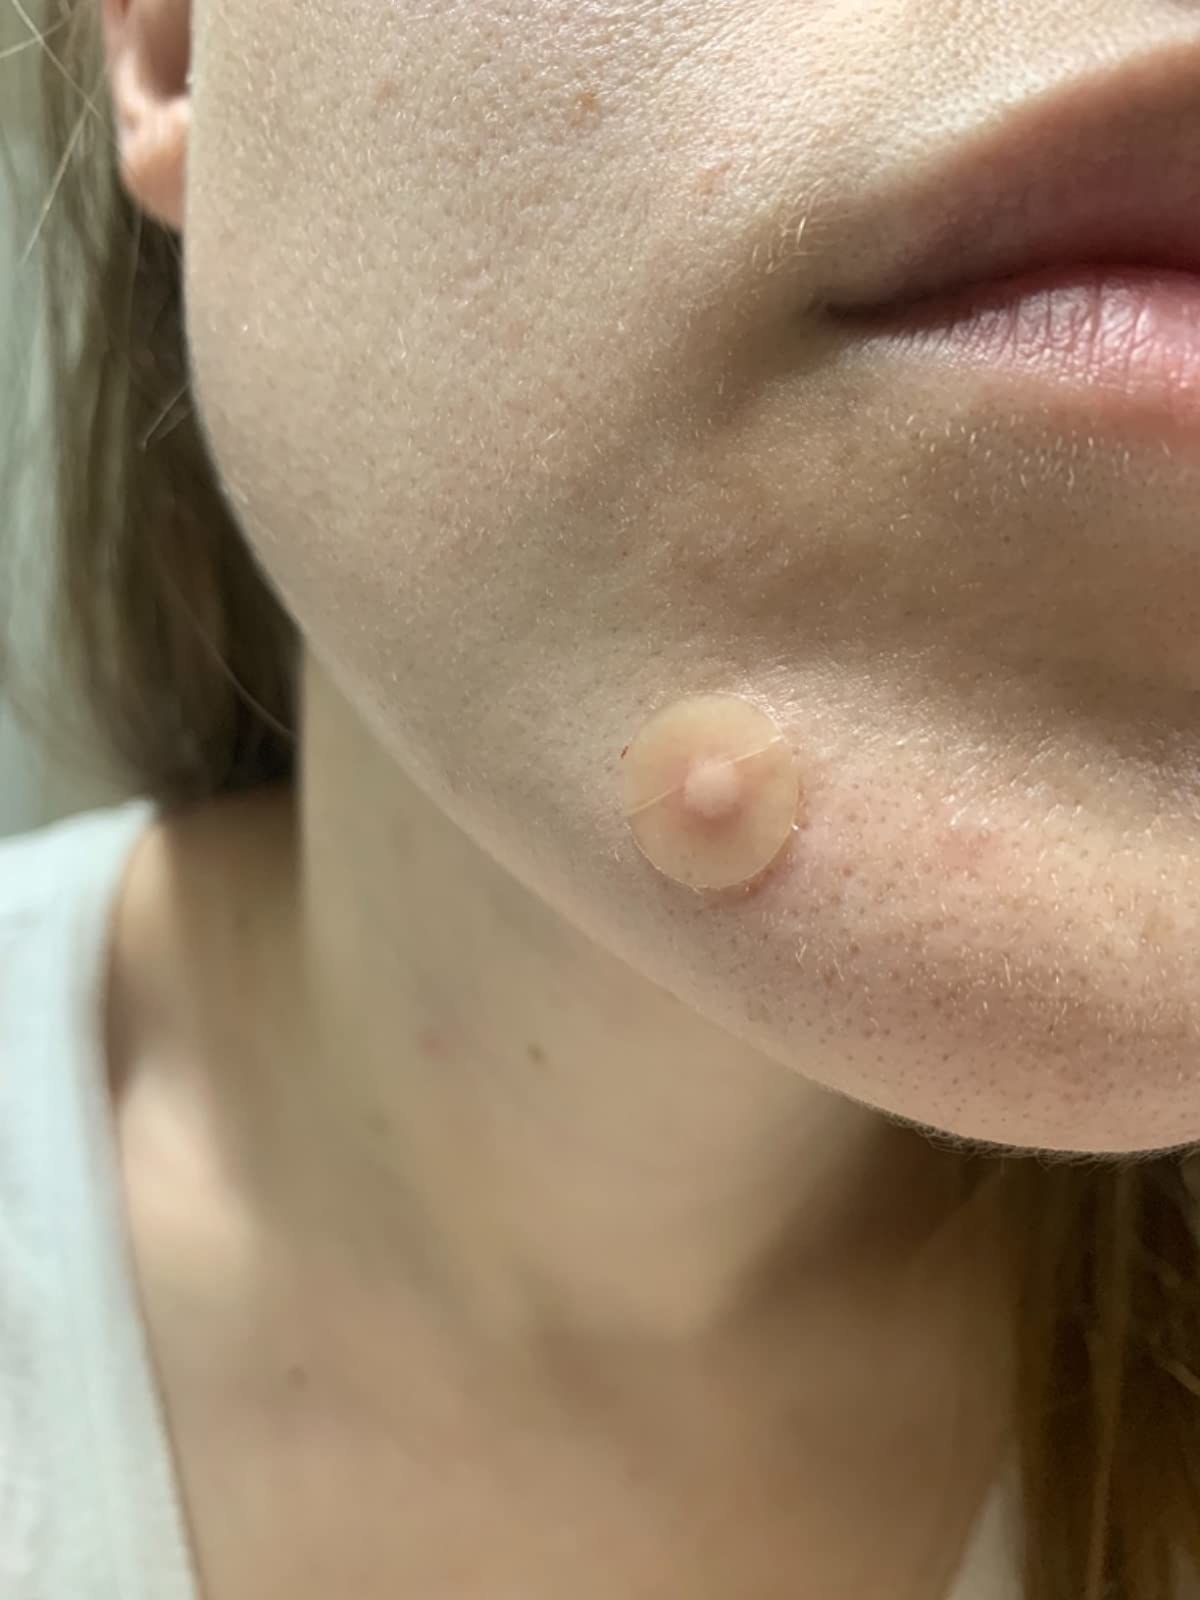 image of pus-filled acne patch on reviewer's face